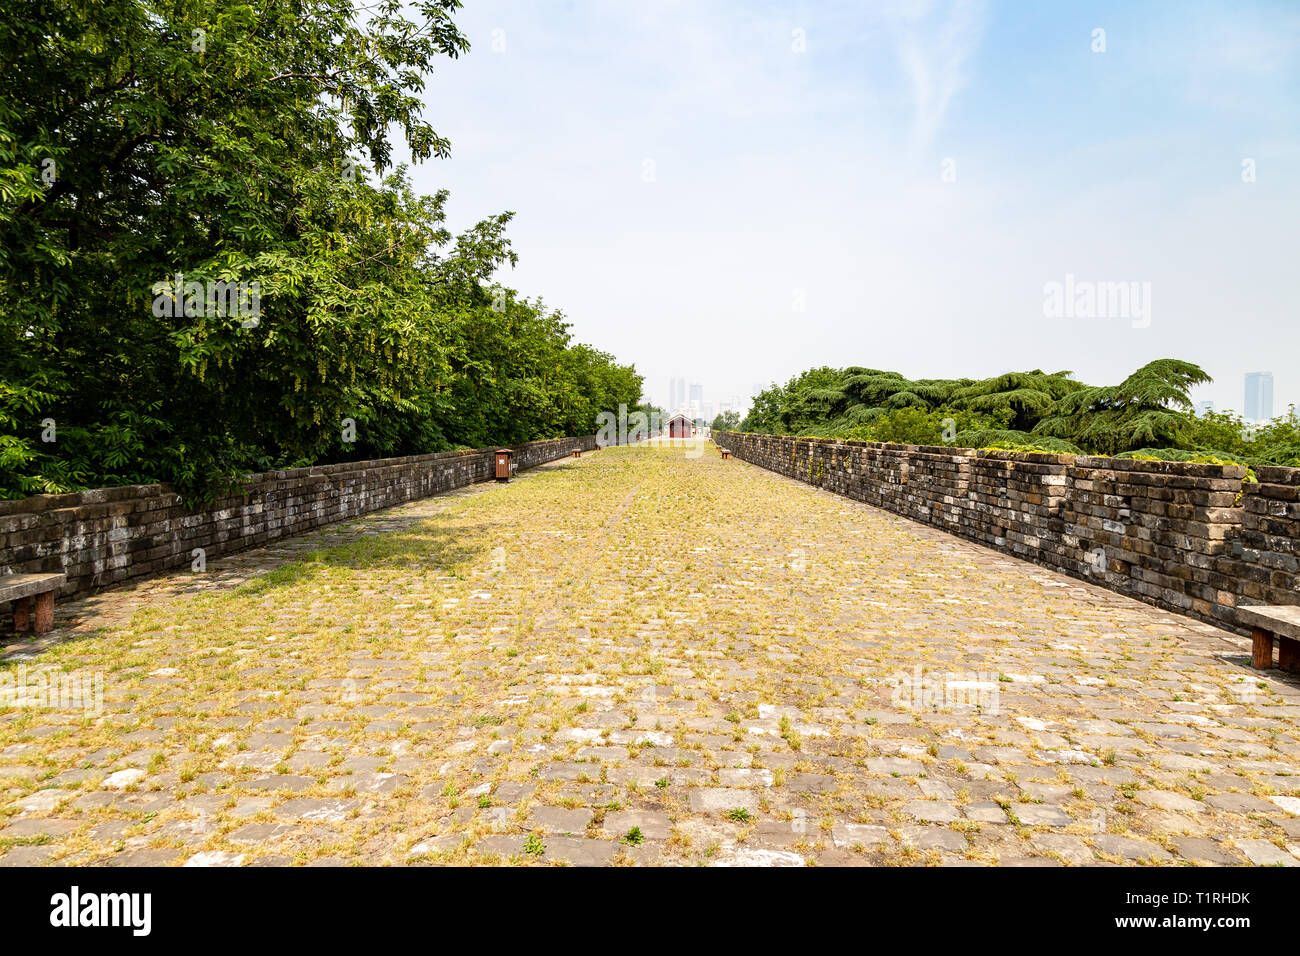 May 2017 - Nanjing, Jiangsu, China - a section of the old Ming Dynasty city walls near Jiming temple. Nanjing has one of the best preserved city walls Stock Photo